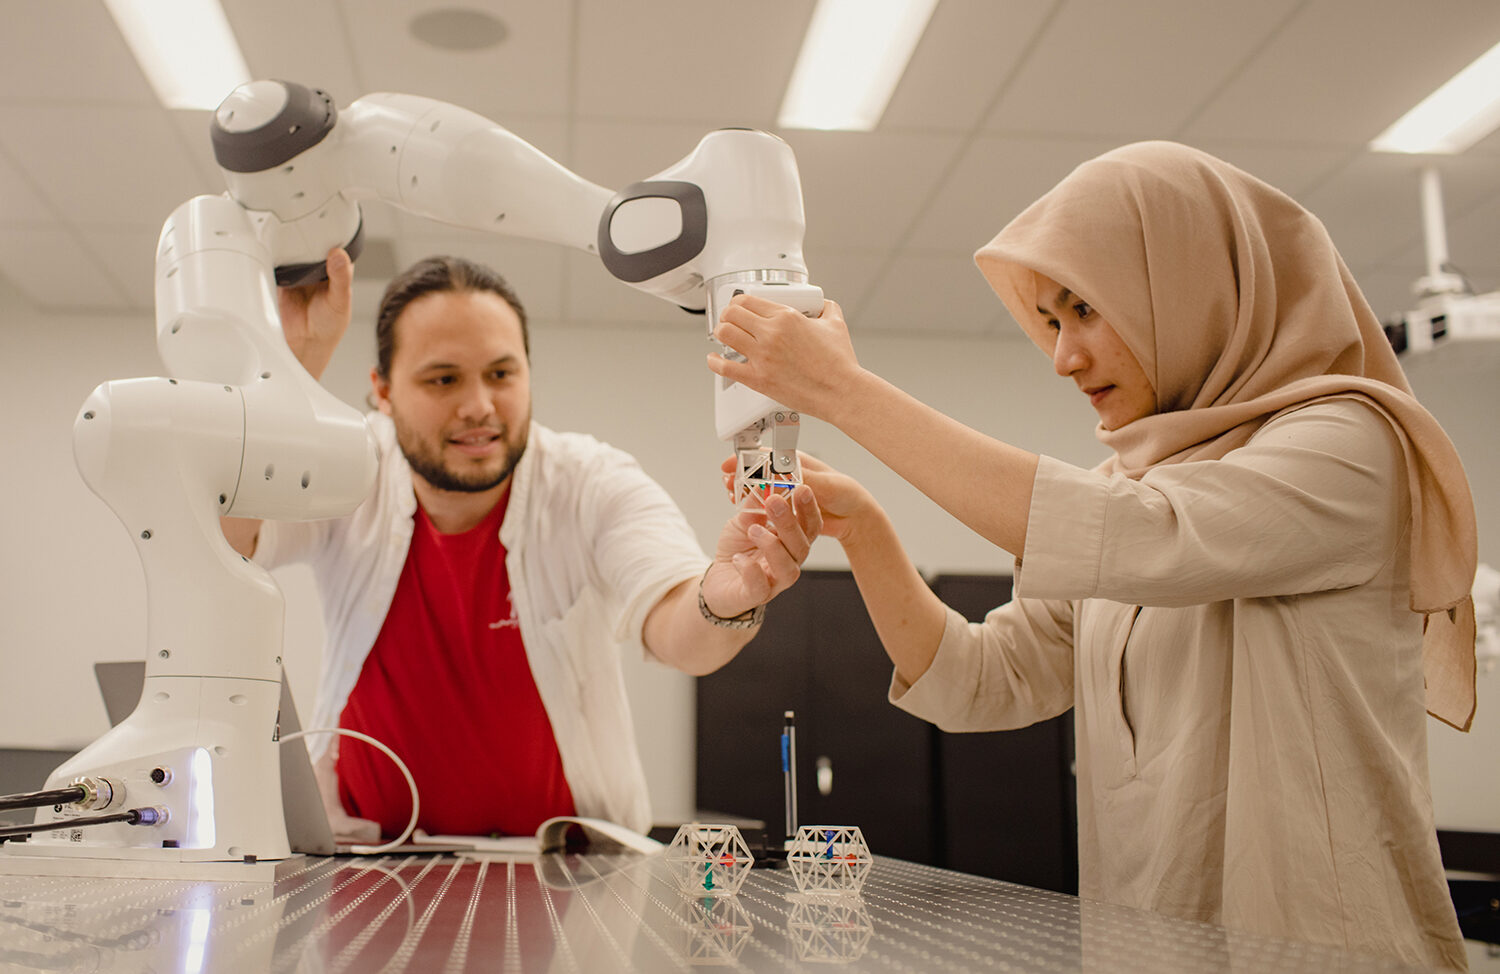 Reinhard Grassmann is holding a robotic arm steady with one hand and a plastic block under the grip of the cobot with the other, while Puspita Dewi, who is wearing a hijab, is adjusting the cobot's grip on the block.